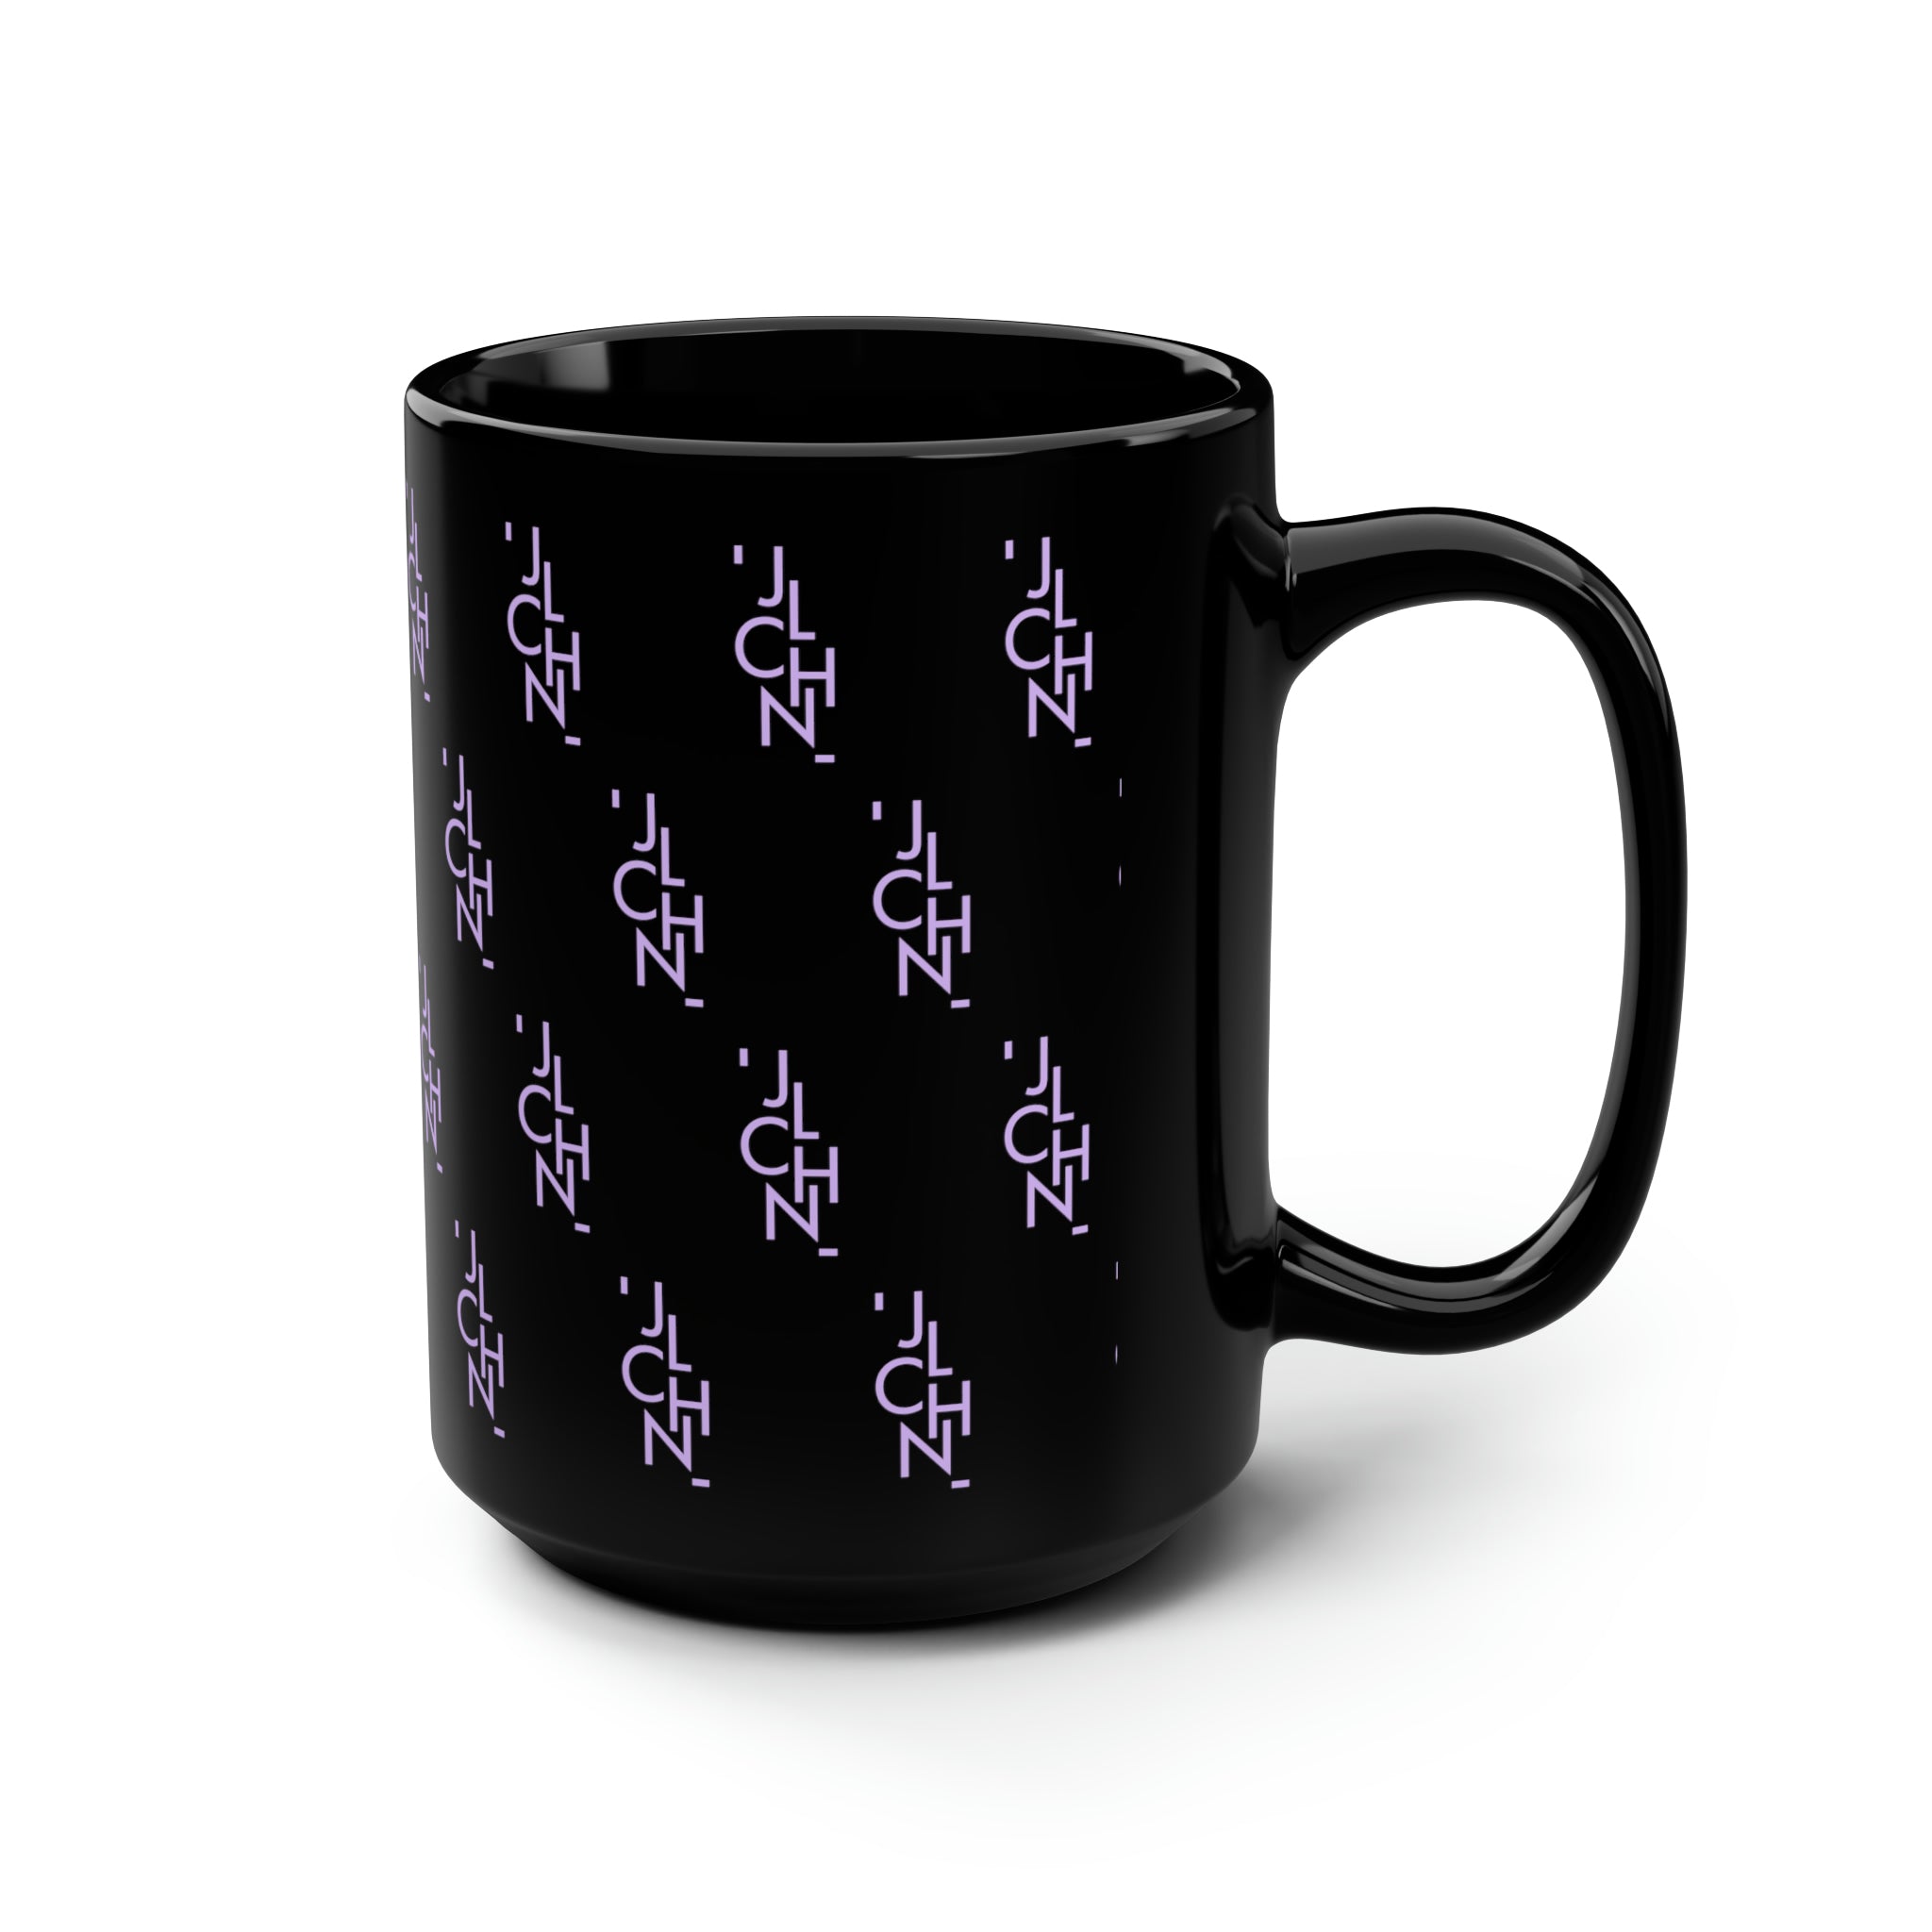 Sip in Style with 450 ml of Musical Magic and 'Don't Spill the Tea' - Juli Chan Purple JLCHN Logo Pattern Mug